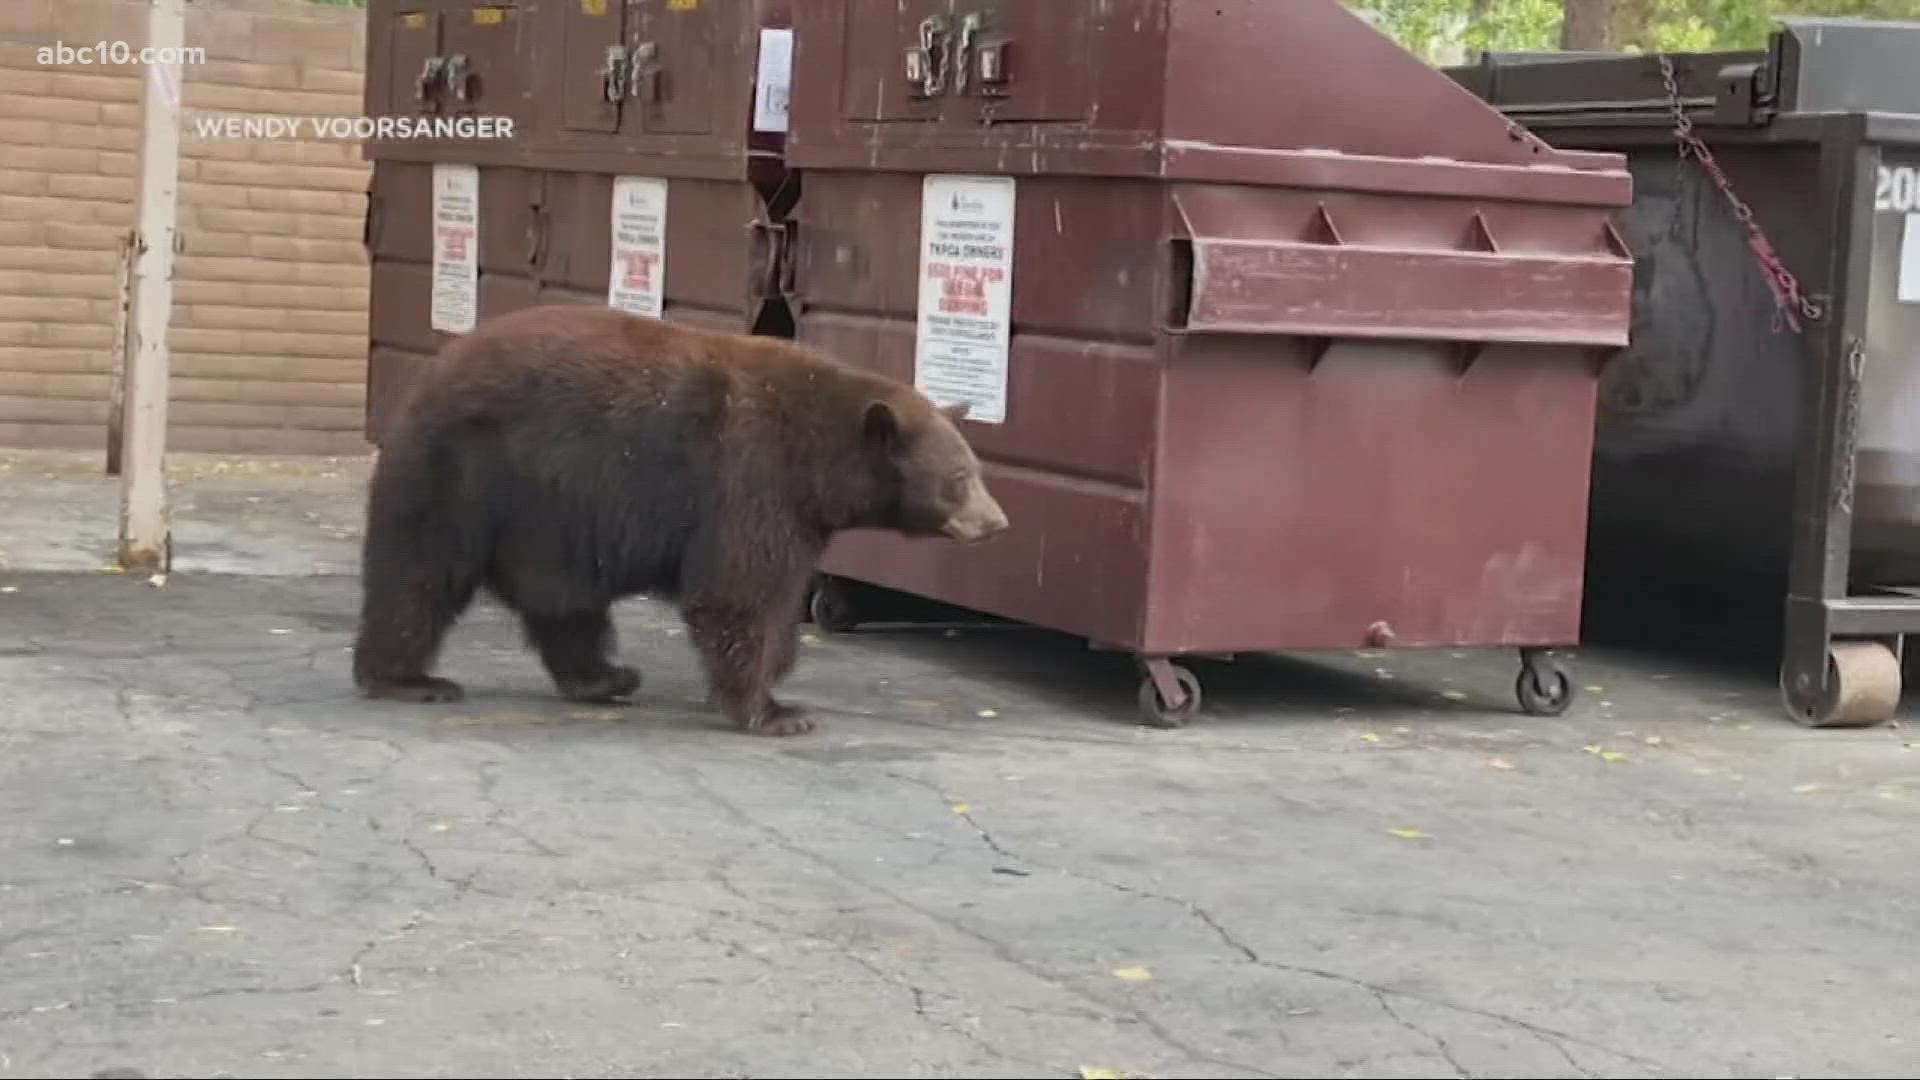 DNA collected from the homes ransacked by bears shows Hank the Tank is among three other bears prowling the area, clearing Tank as the sole suspect in the crimes.